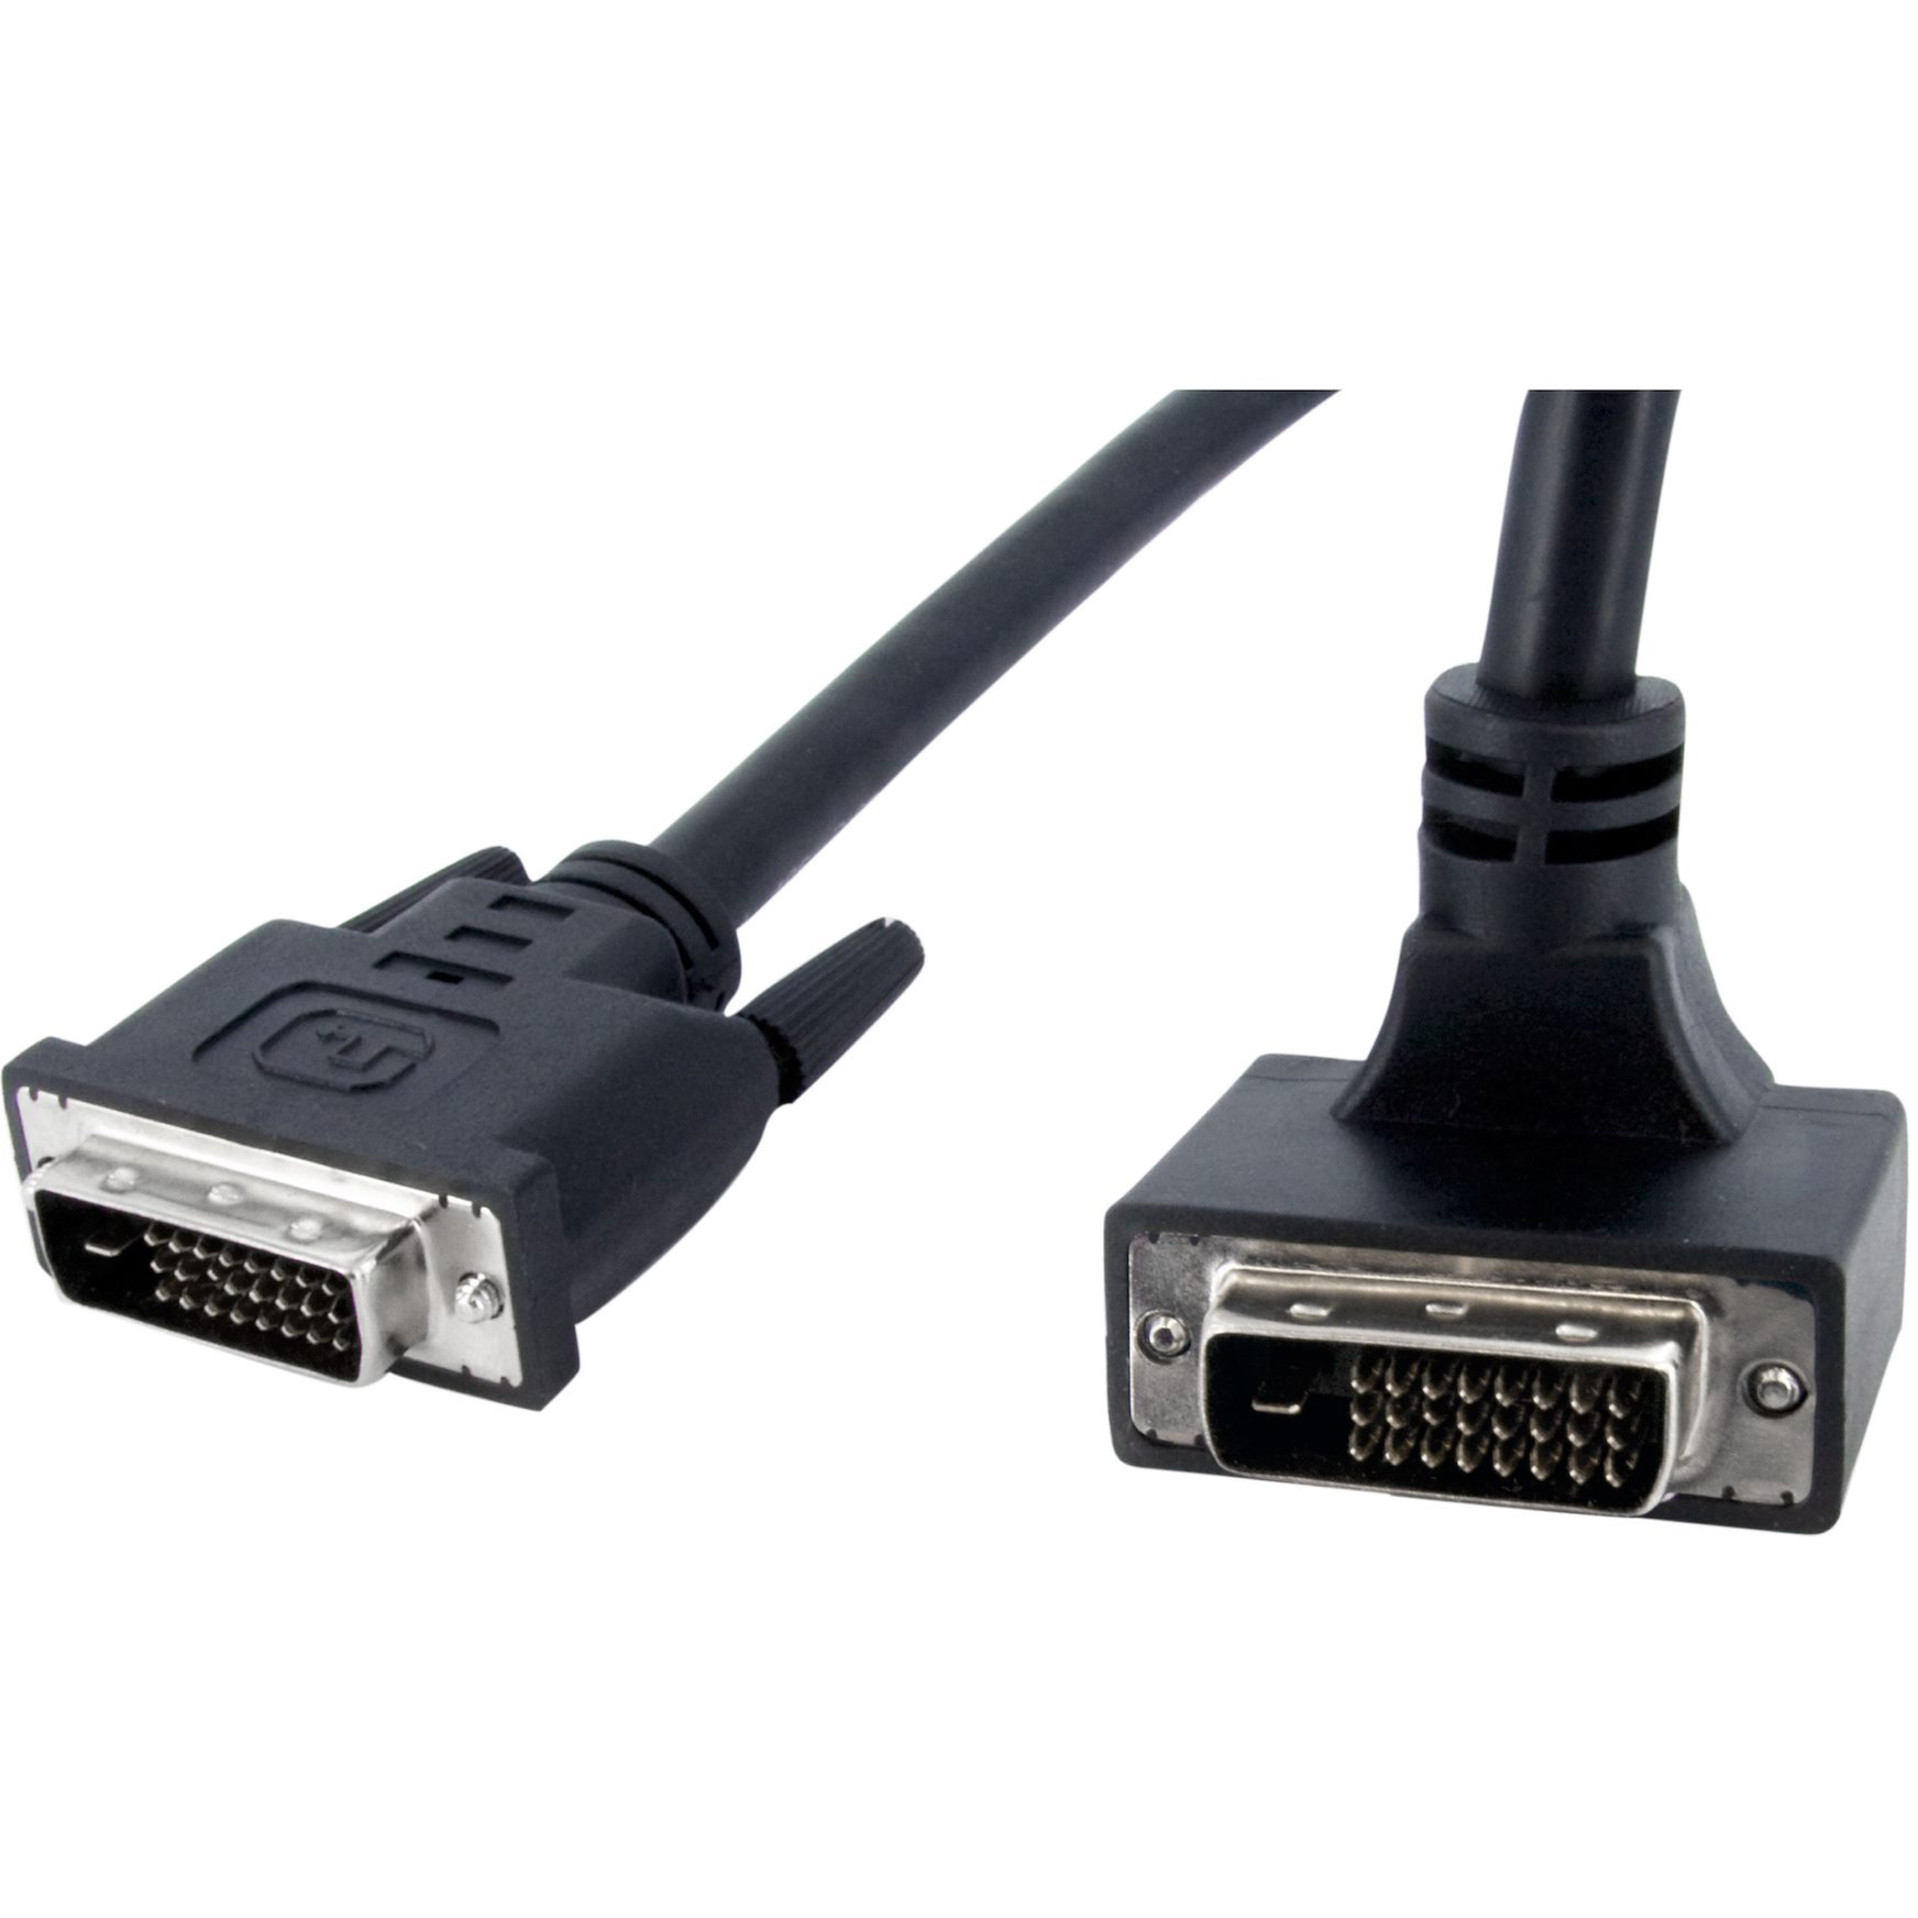 Startech .com 6 ft 90 Degree Down Angled DVI-D Monitor CableM/MProvides a high speed, crystal clear connection between your DVI devices,… DVIDDMMBA6